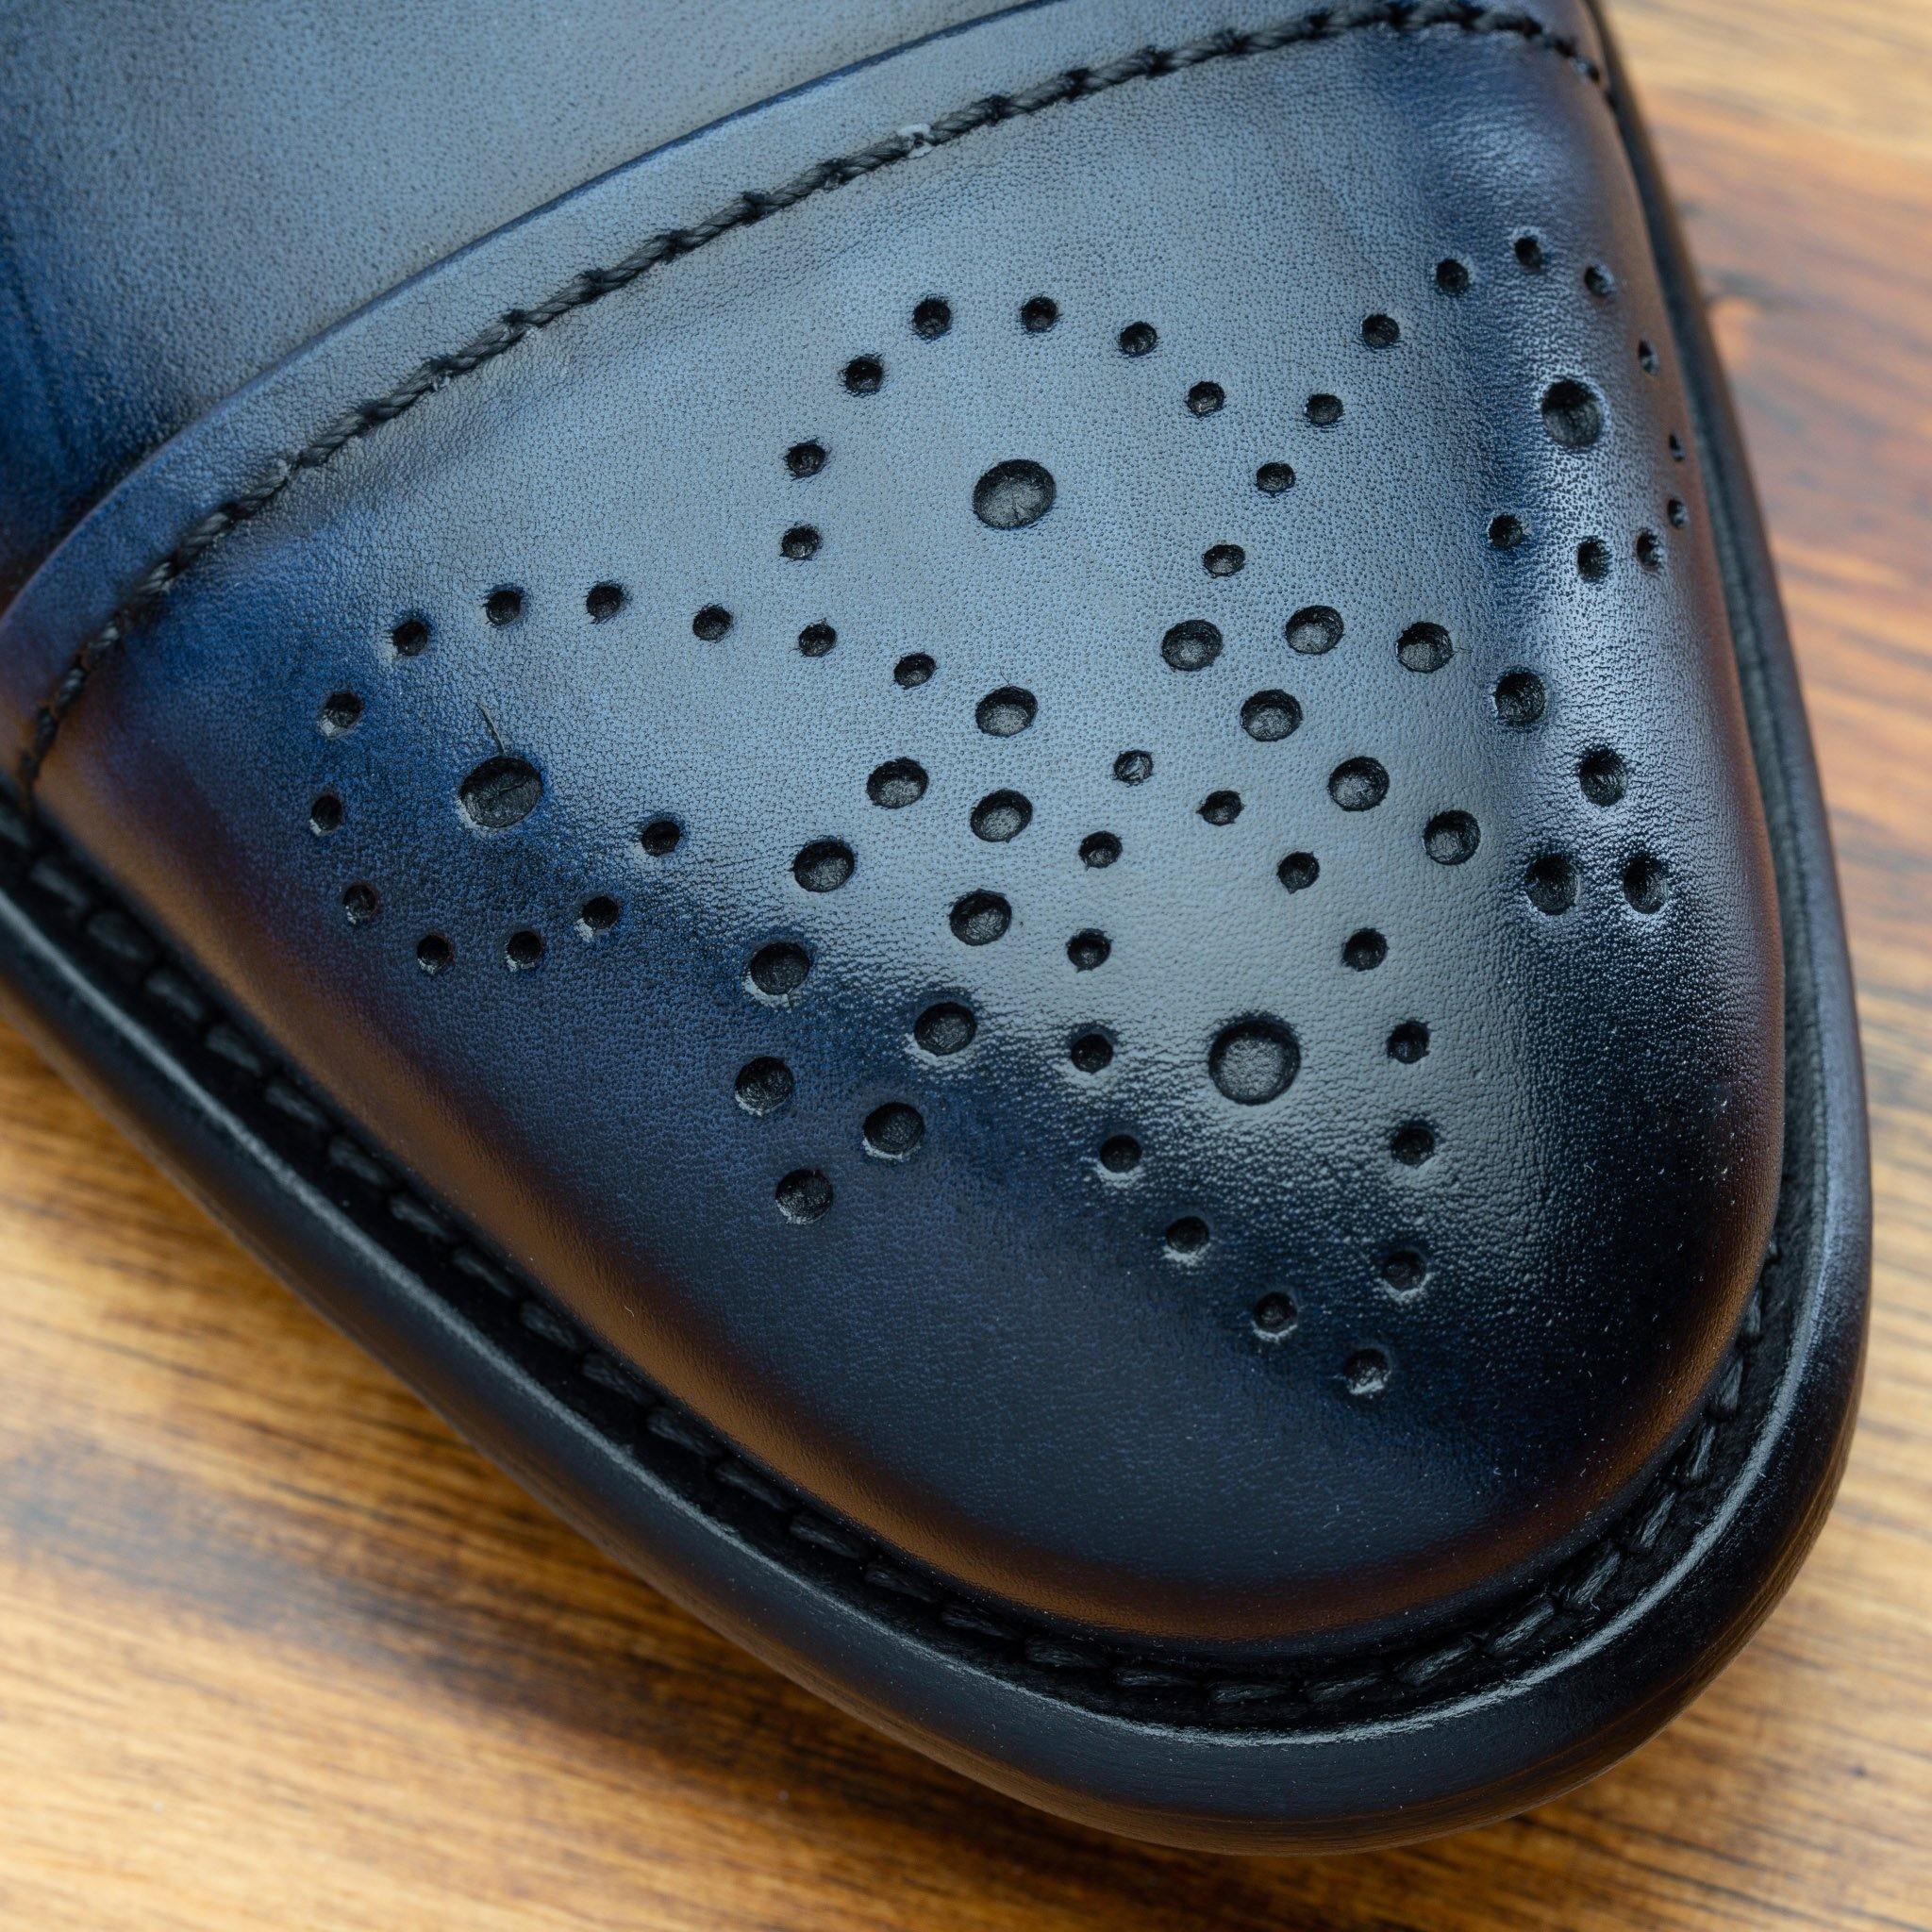 Up close picture of the Medallion Toe of the 2361 Calzoleria Toscana Blue Cayenne Calf Cap Toe